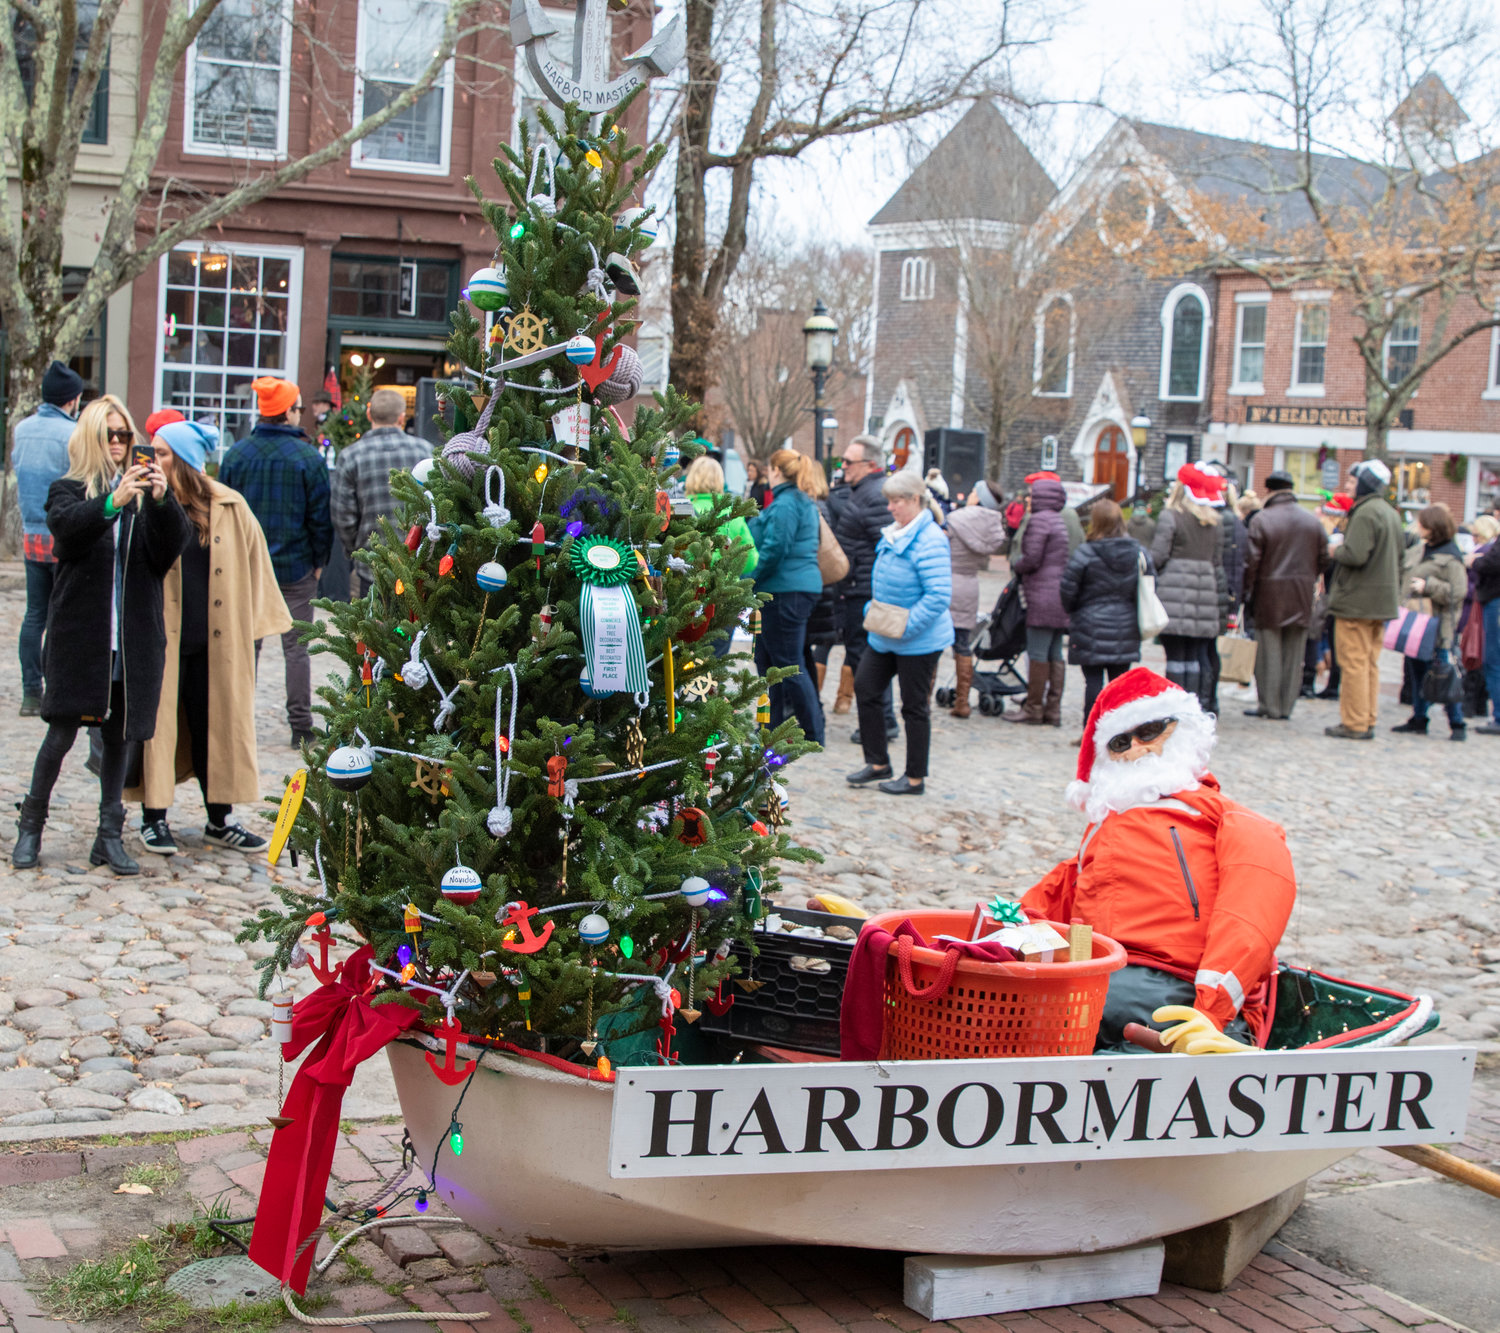 The Nantucket Harbormaster’s office traditionally has one of the most creative trees on Main Street each holiday season.